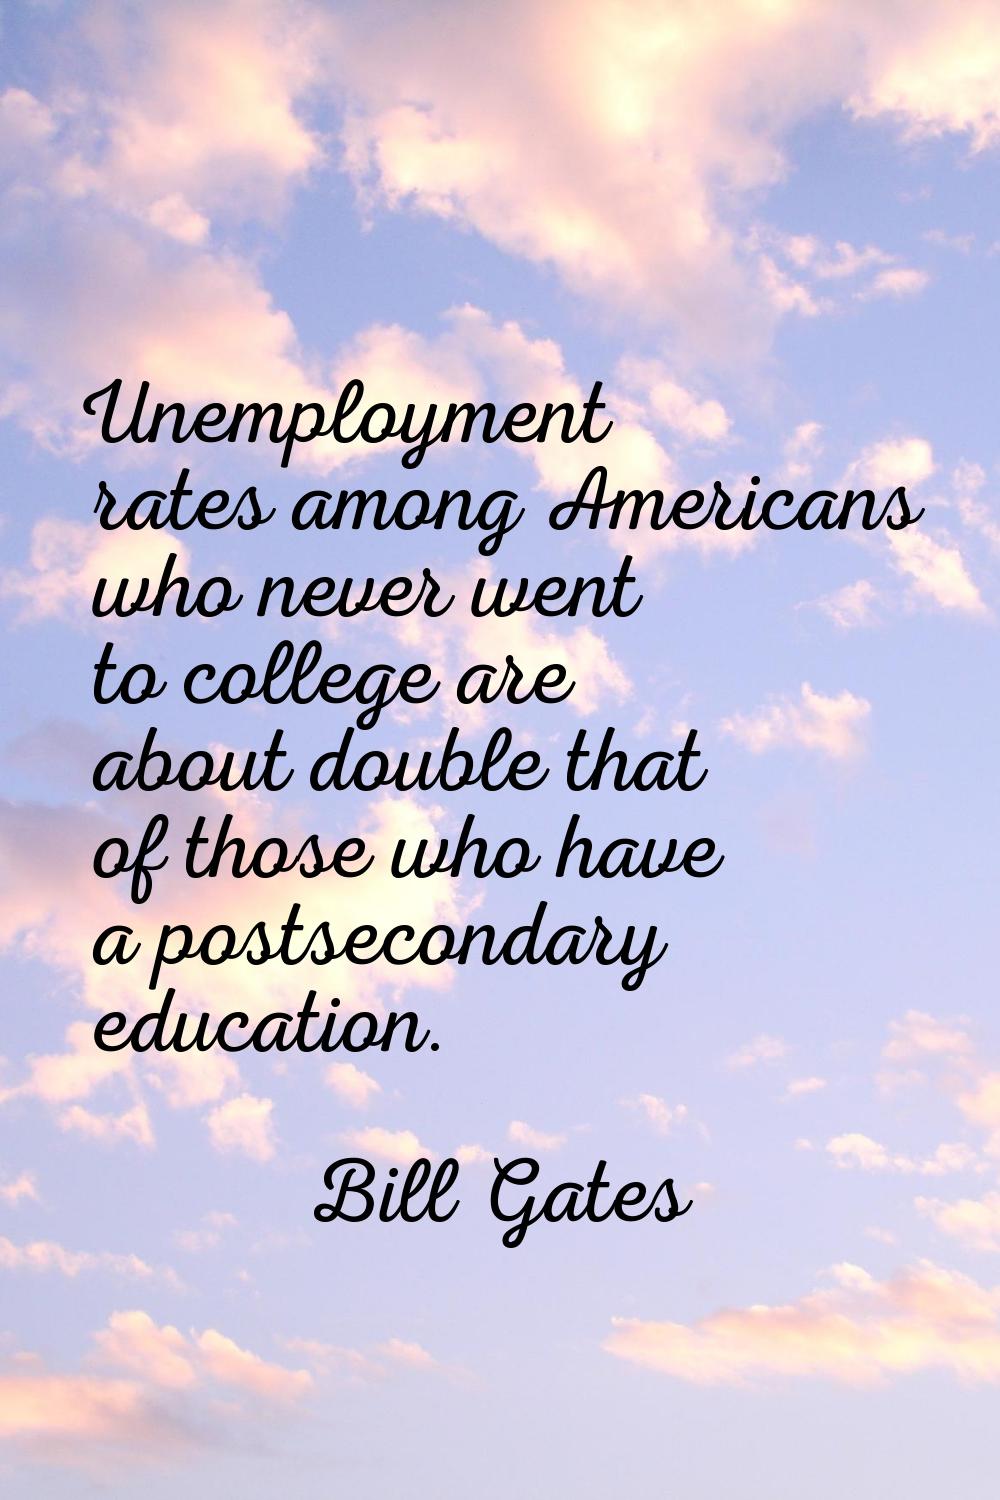 Unemployment rates among Americans who never went to college are about double that of those who hav